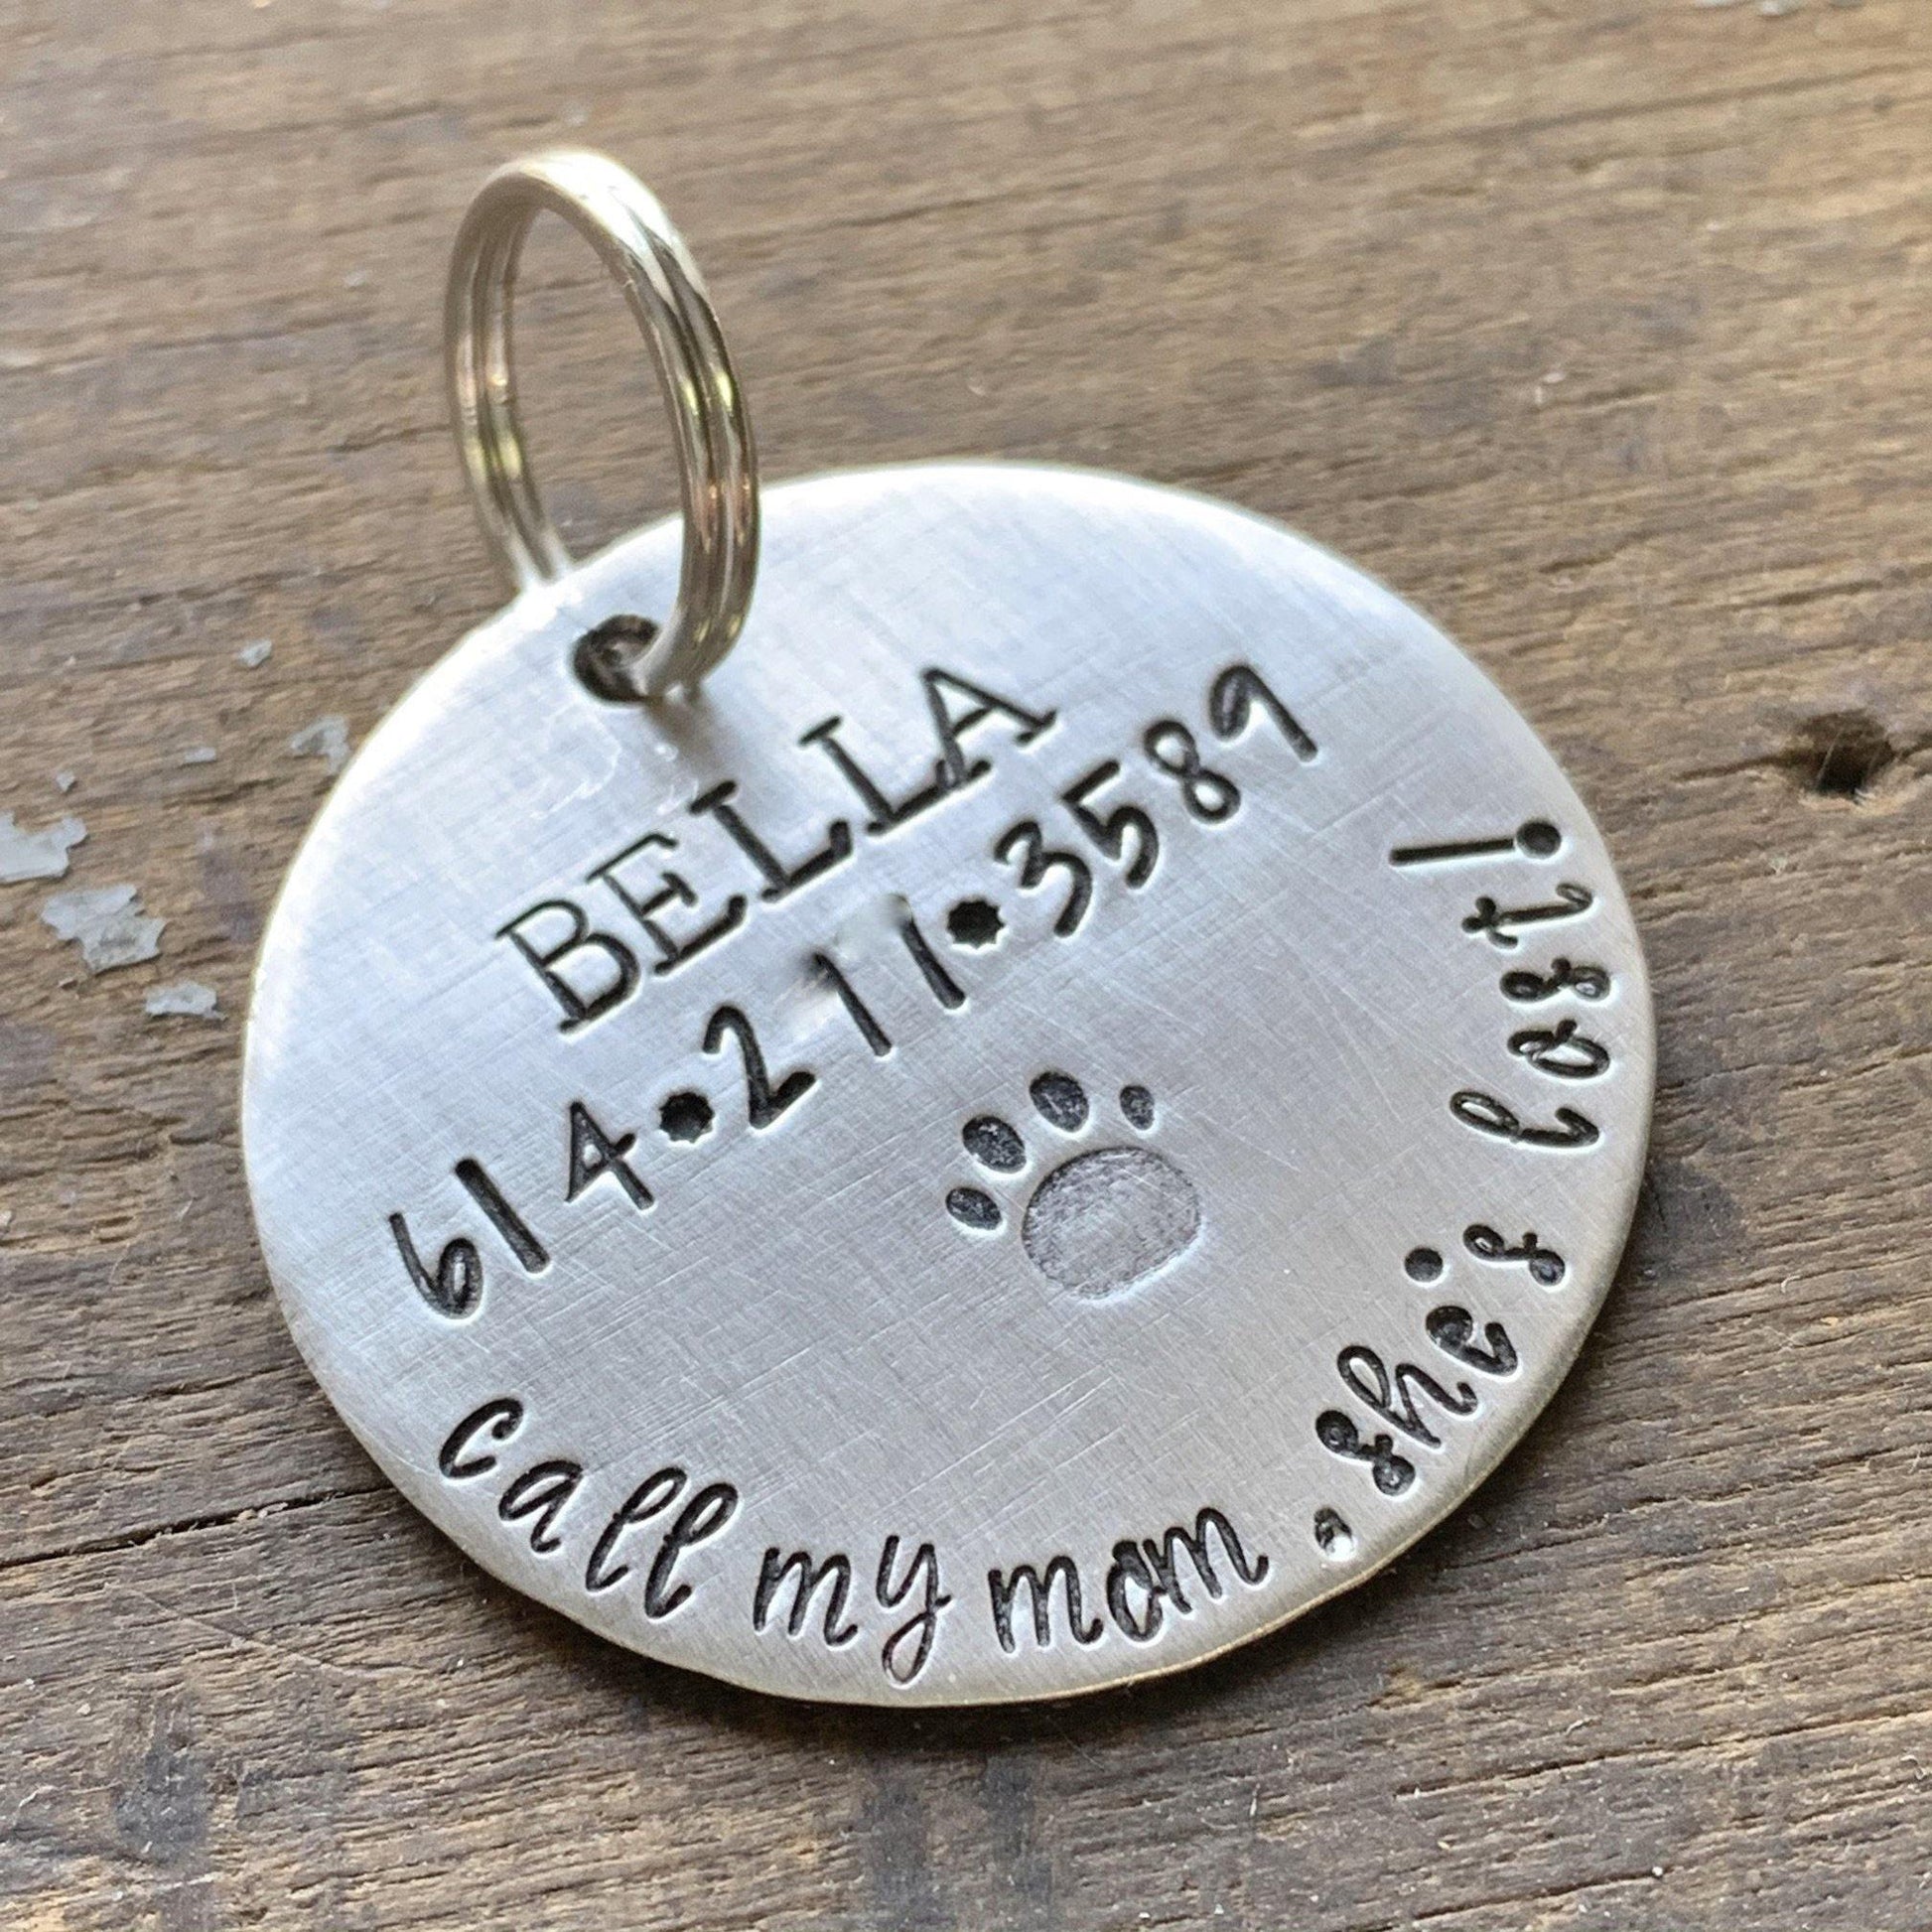 Sterling Silver Engraved Large Double Dog Tags With 